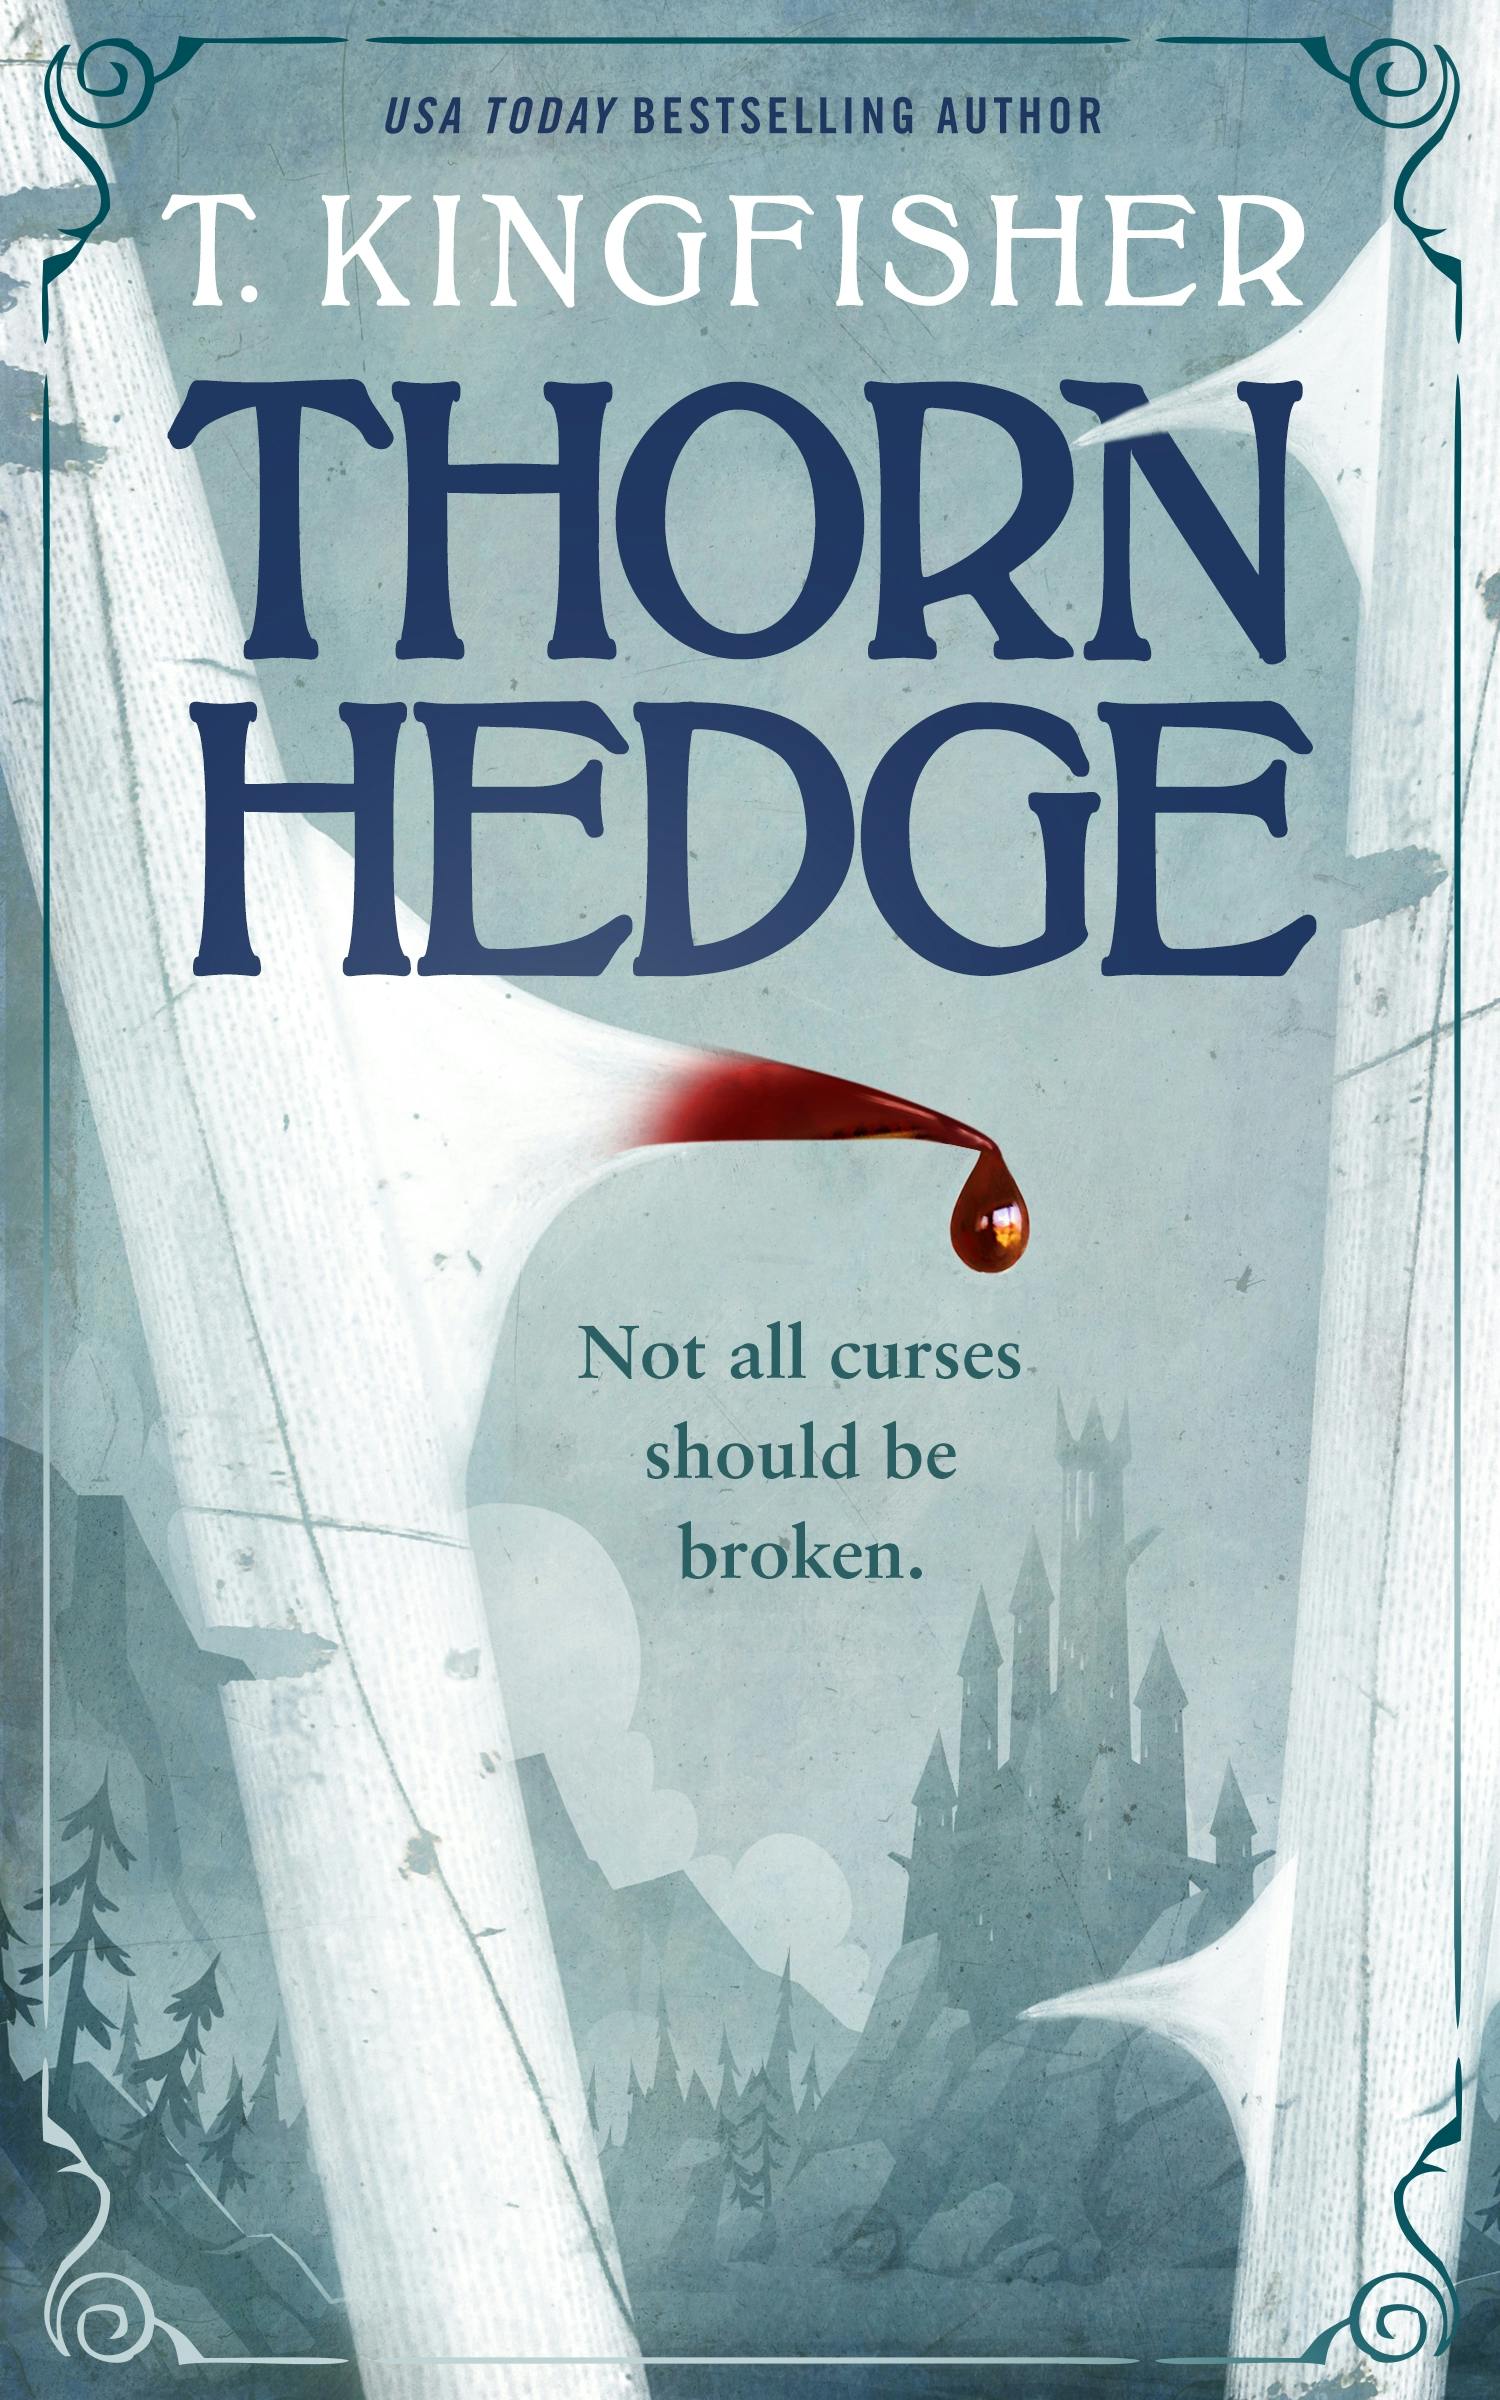 Cover for the book titled as: Thornhedge